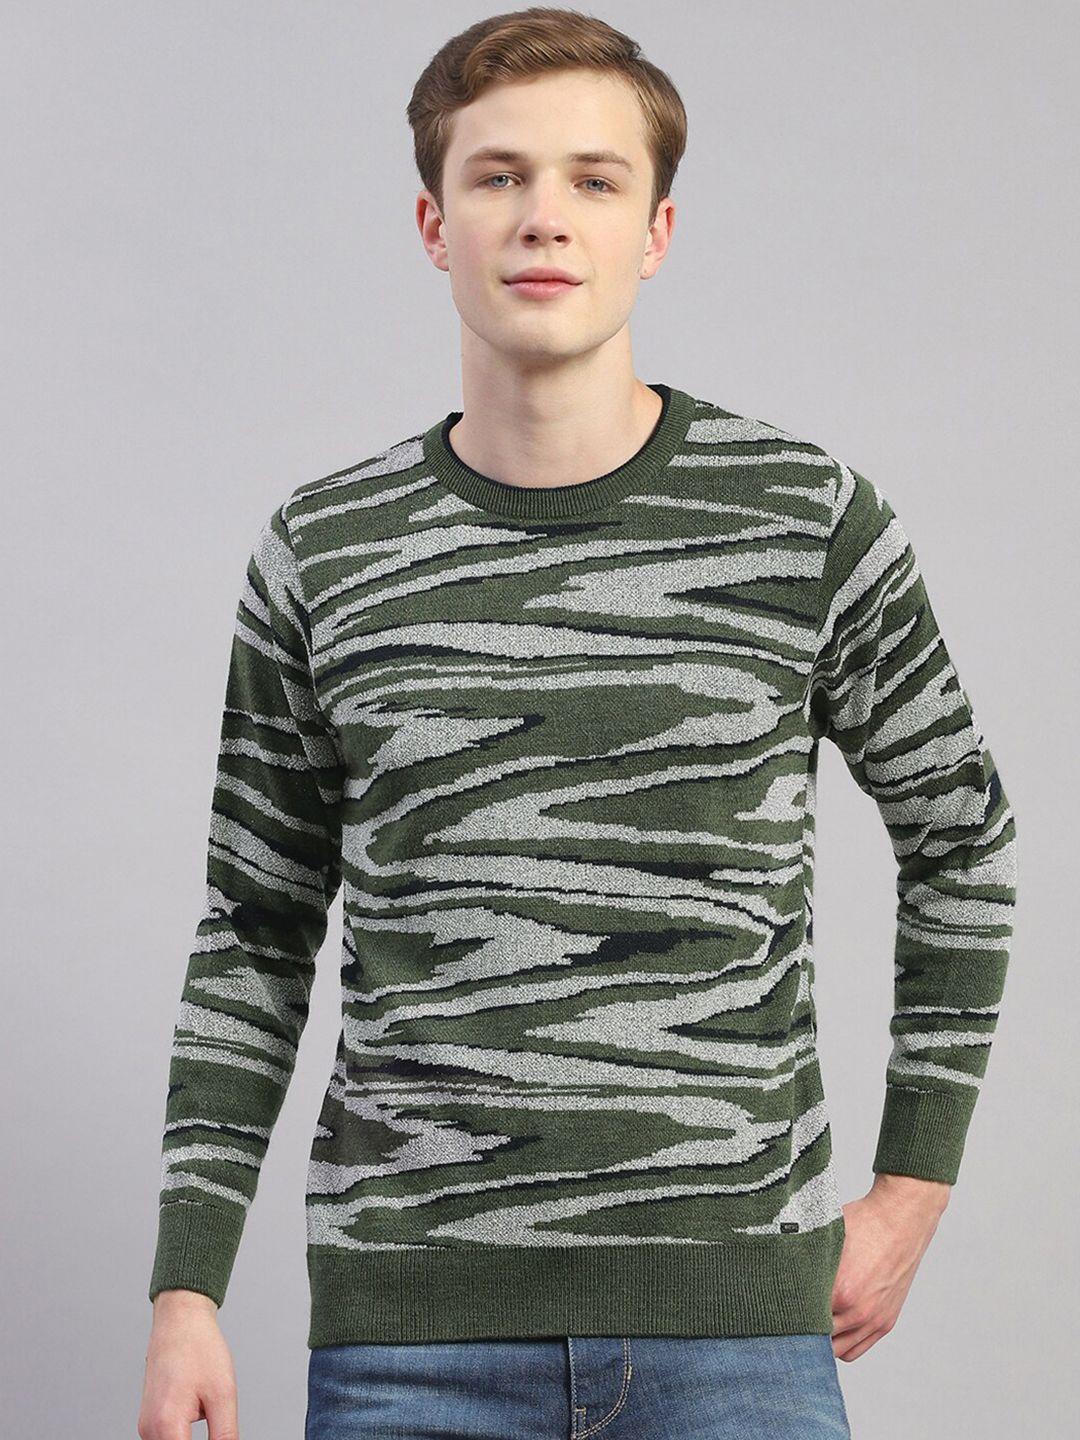 Monte Carlo Abstract Printed Woollen Pullover